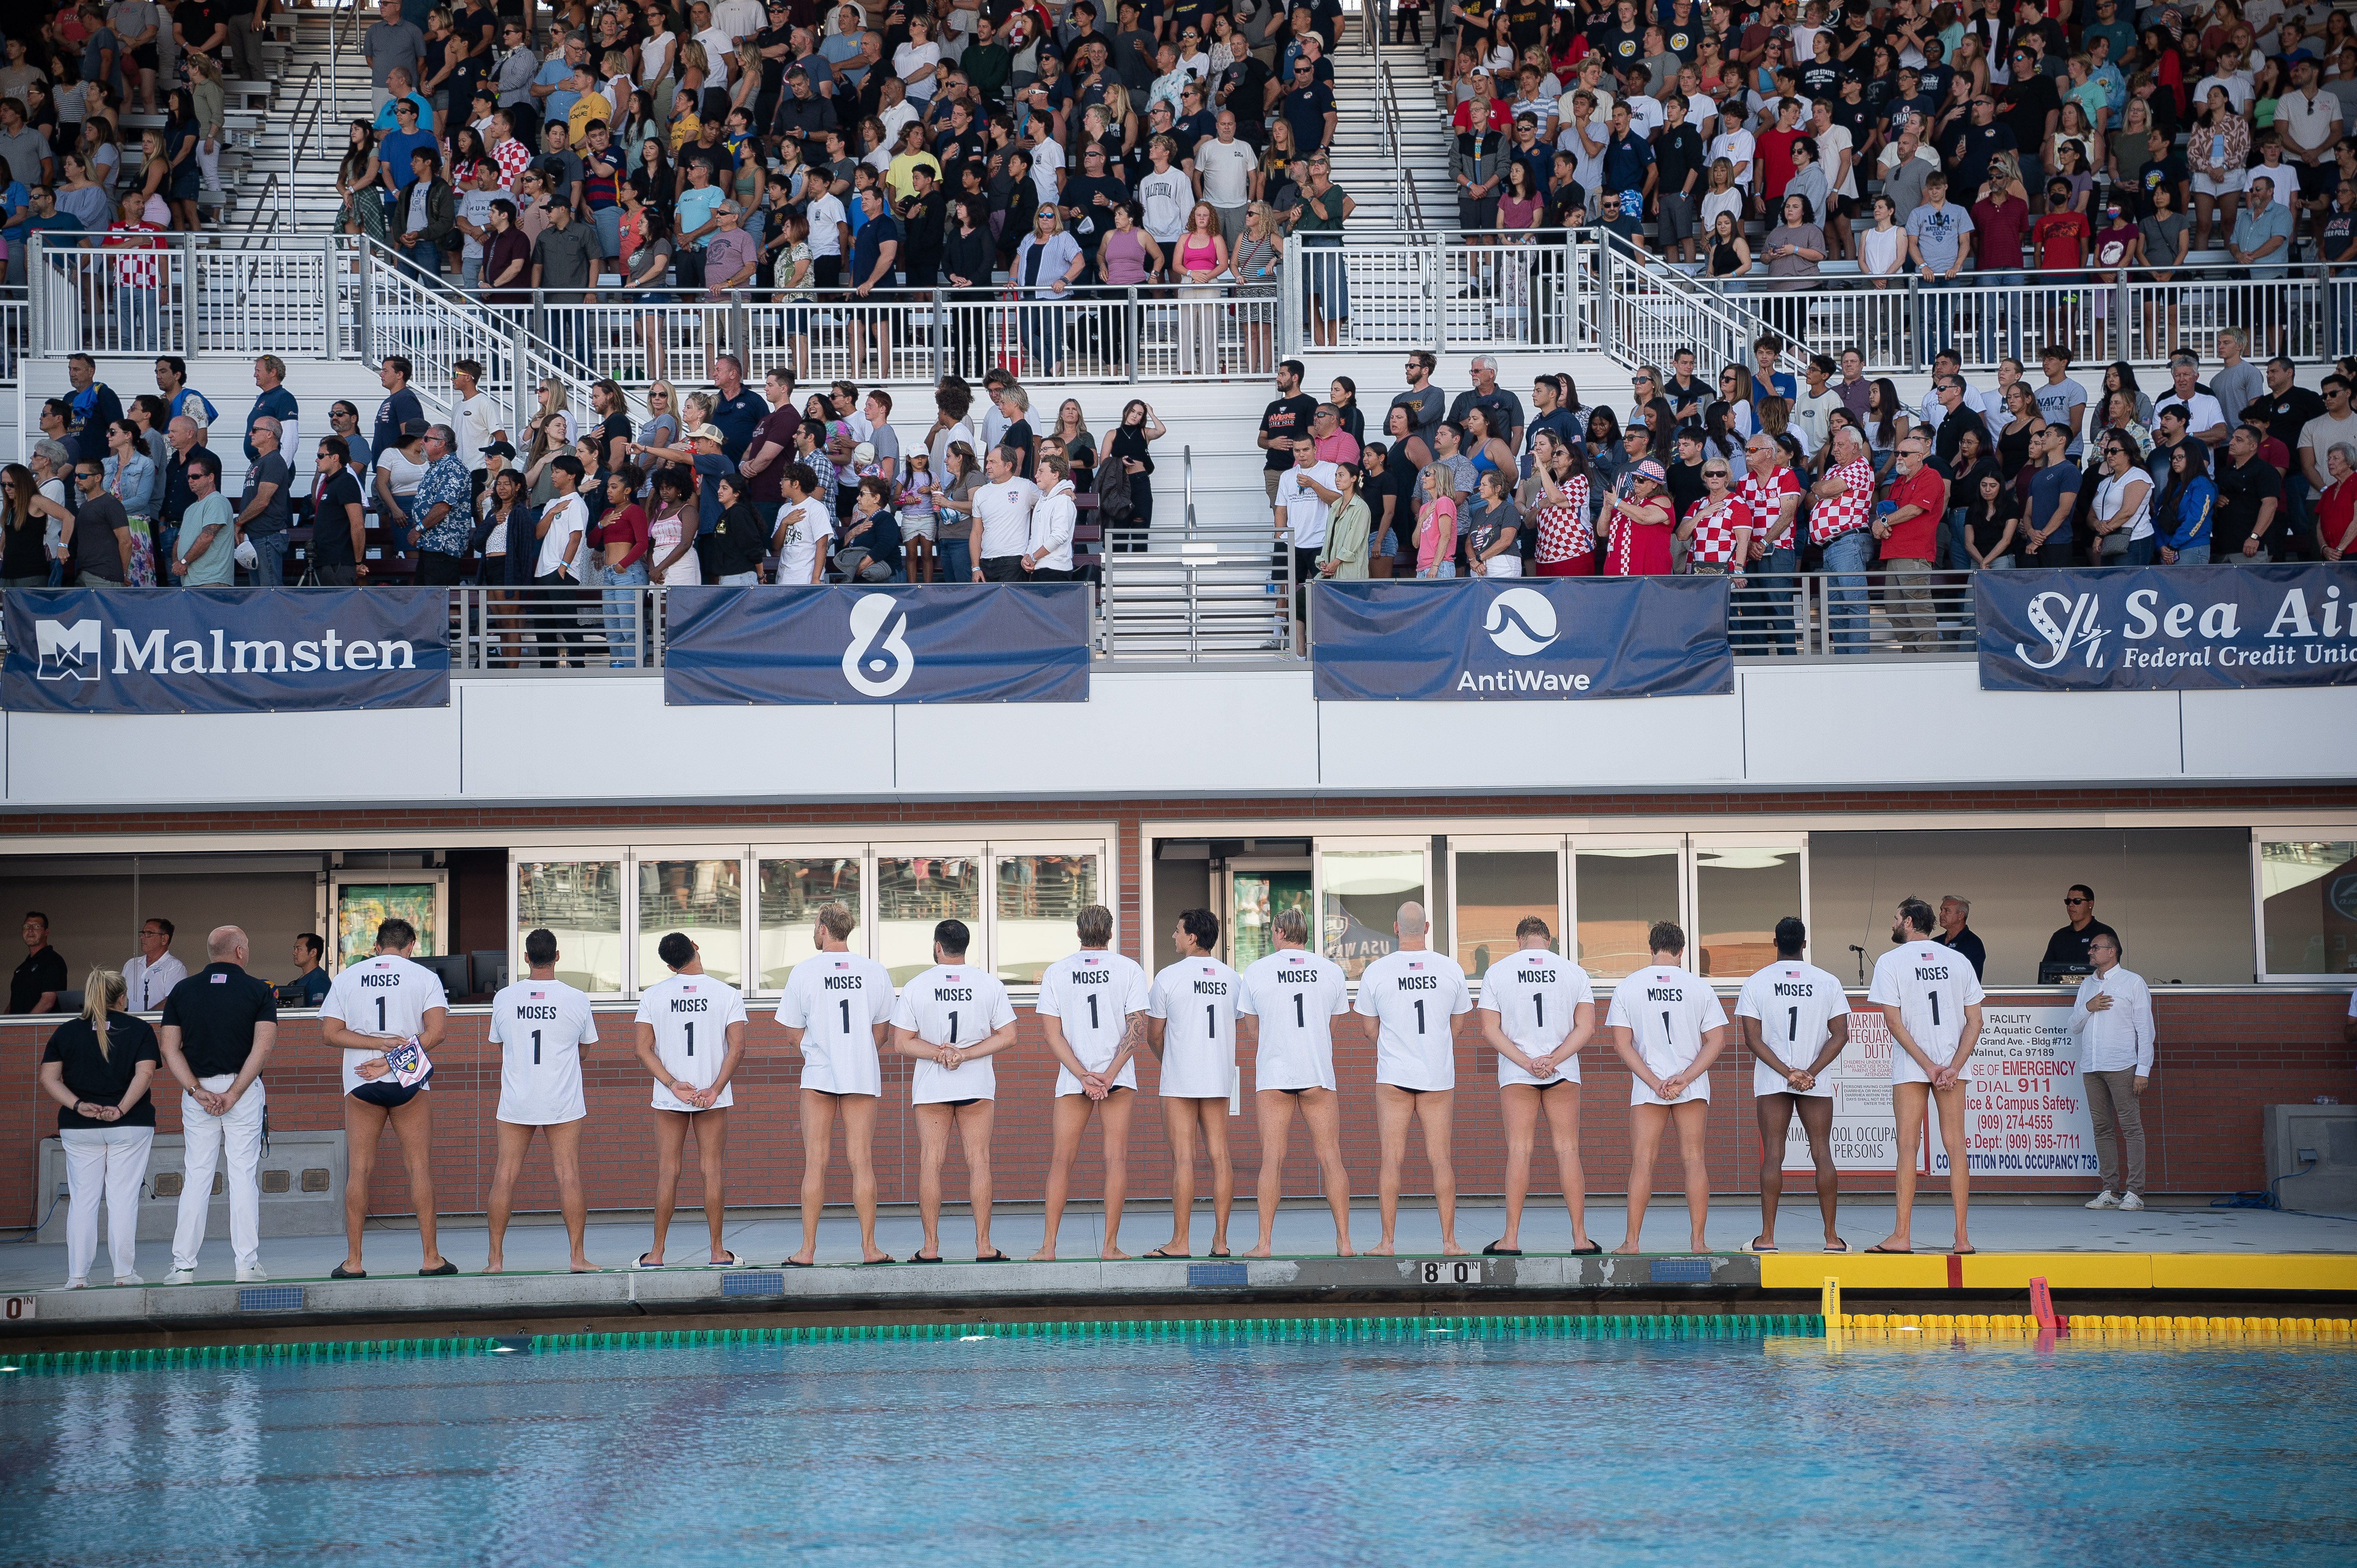 water polo players lined up along pool